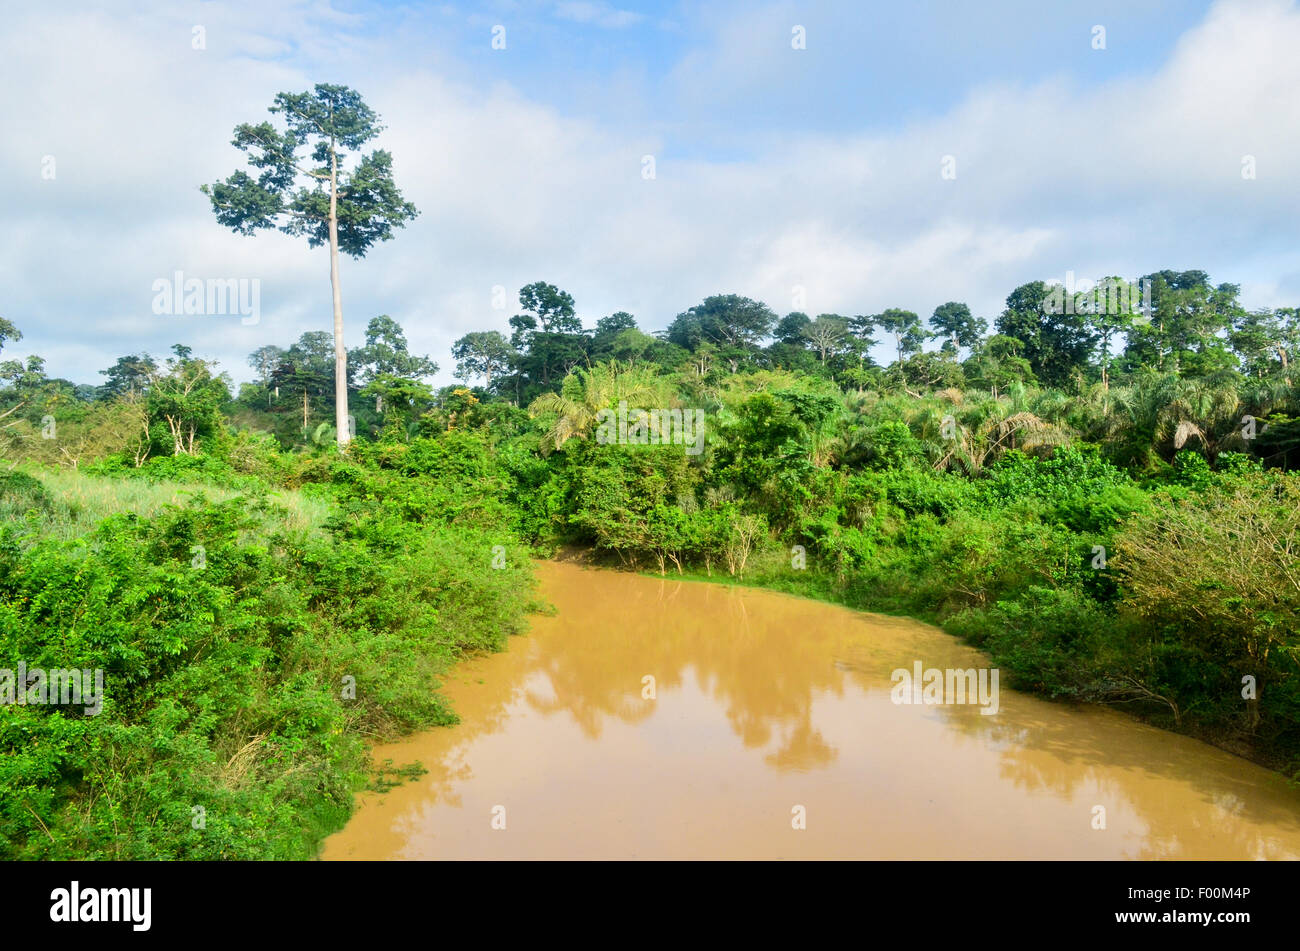 A brownish river in Ghana Stock Photo